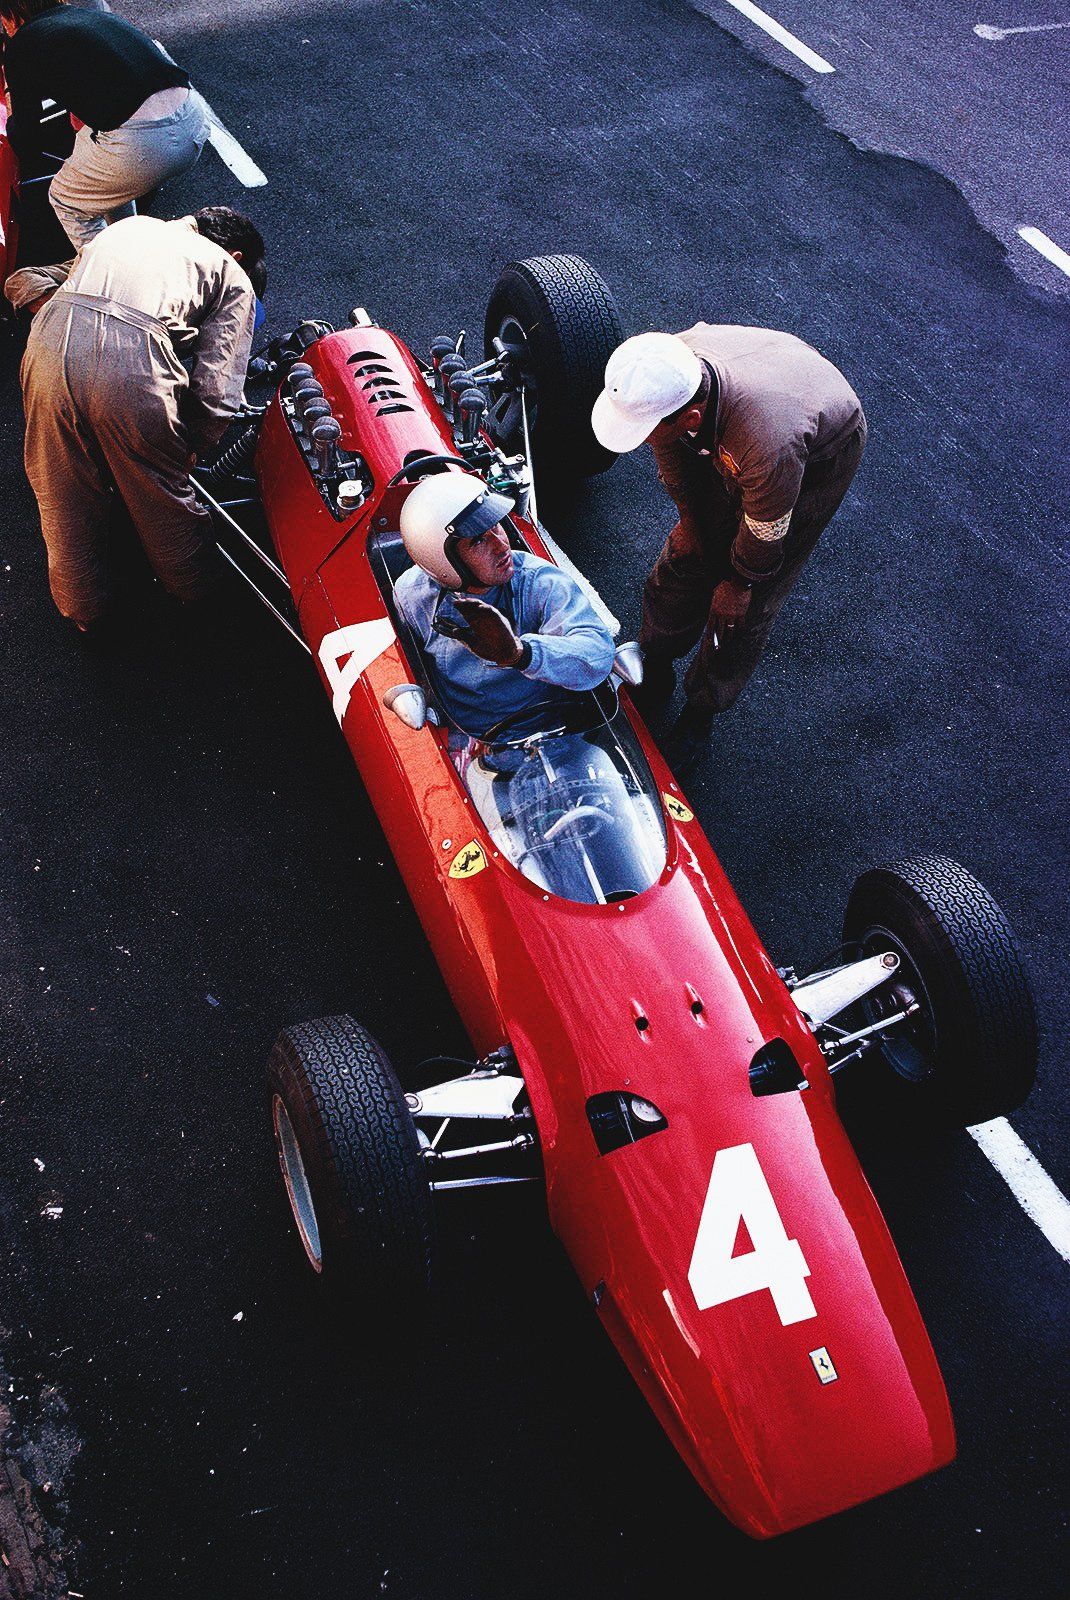 Vintage Racing iPhone Wallpaper You Need To Have